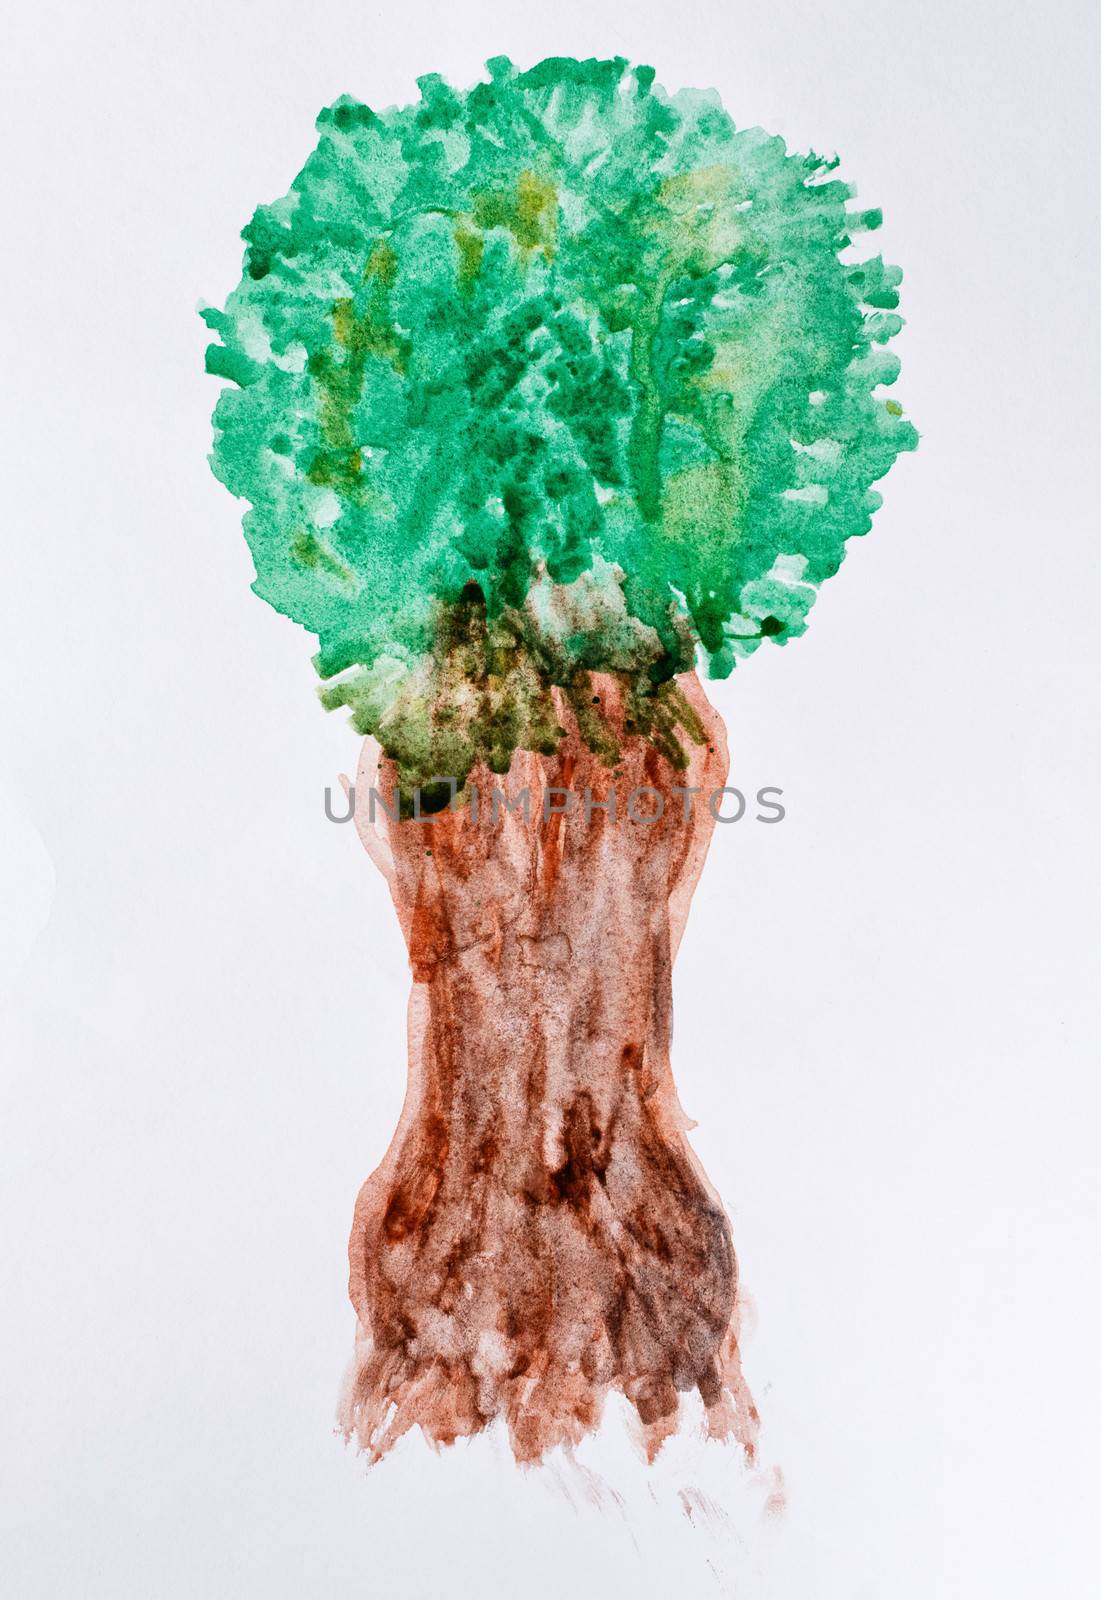 Children's watercolor tree on textured paper background shot